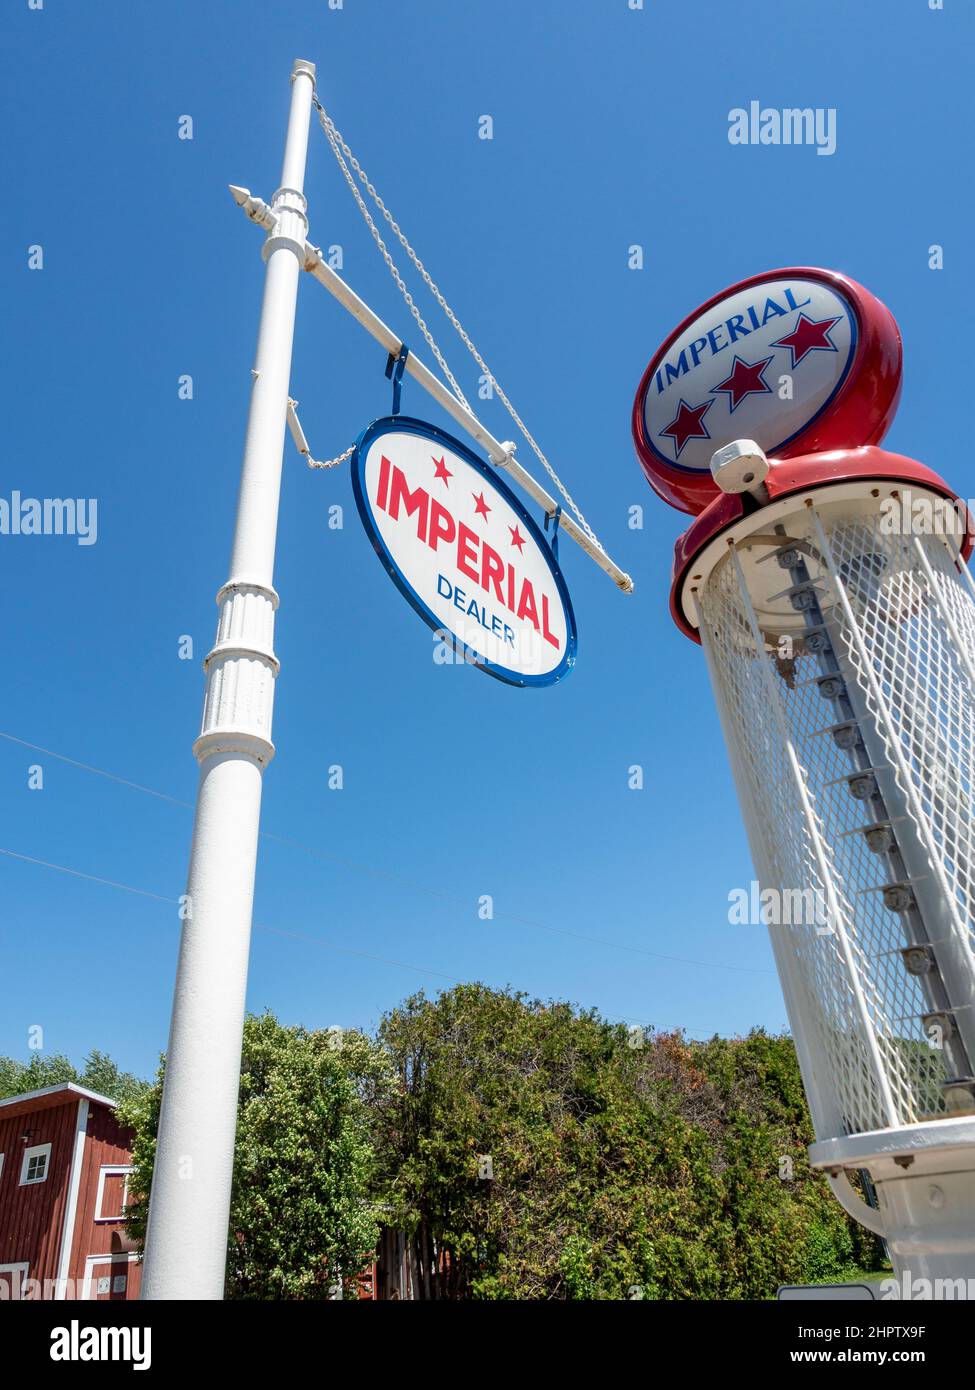 Vintage Imperial Gas Pump: An Imperial sign with an old gas pump behind against a bright blue sky. Stock Photo